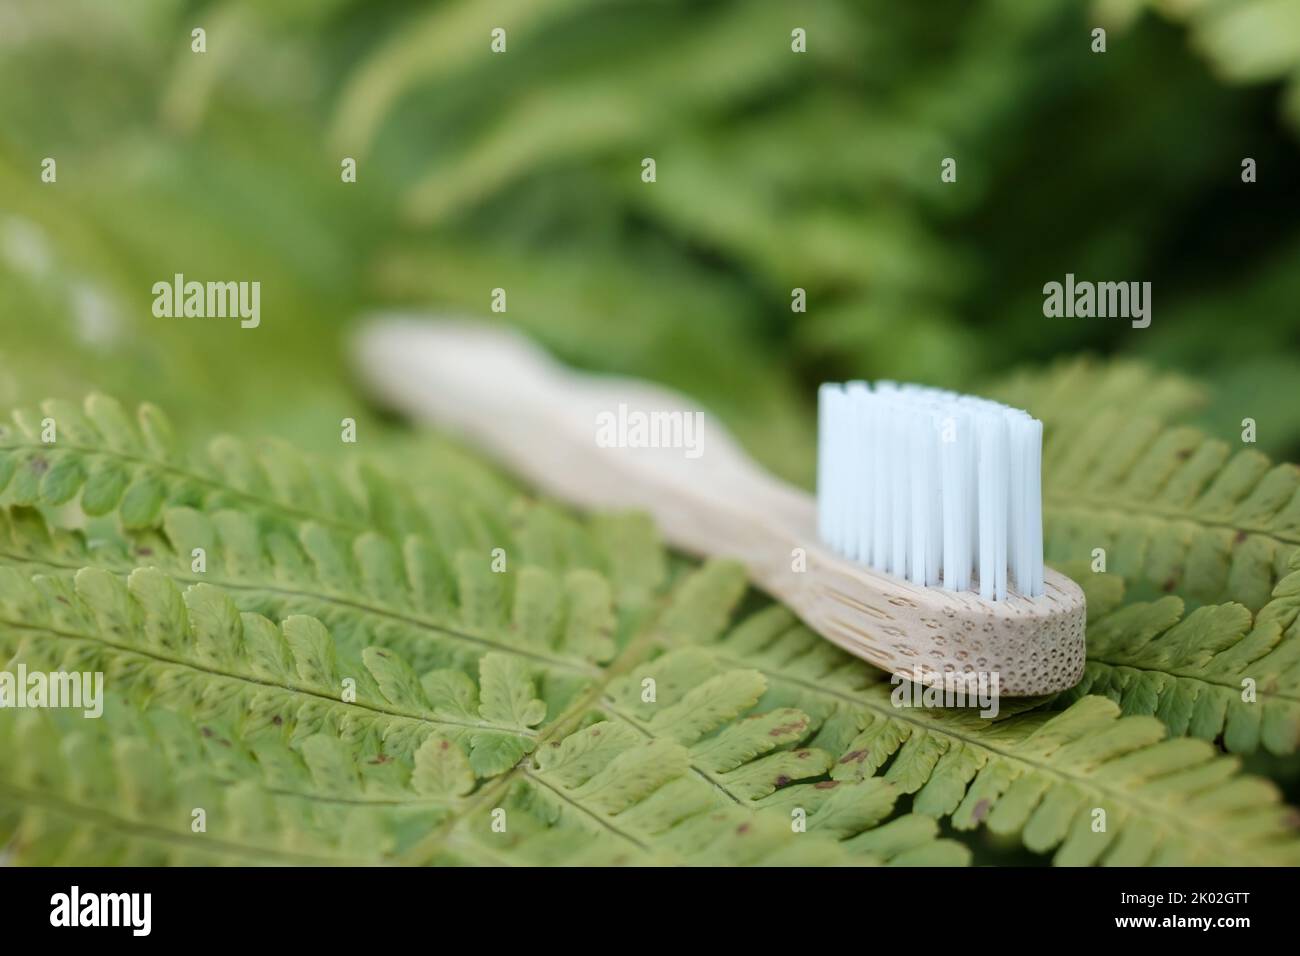 Close-up of a biodegradable bamboo toothbrush on a fern leaf. Environmental care concept. Stock Photo